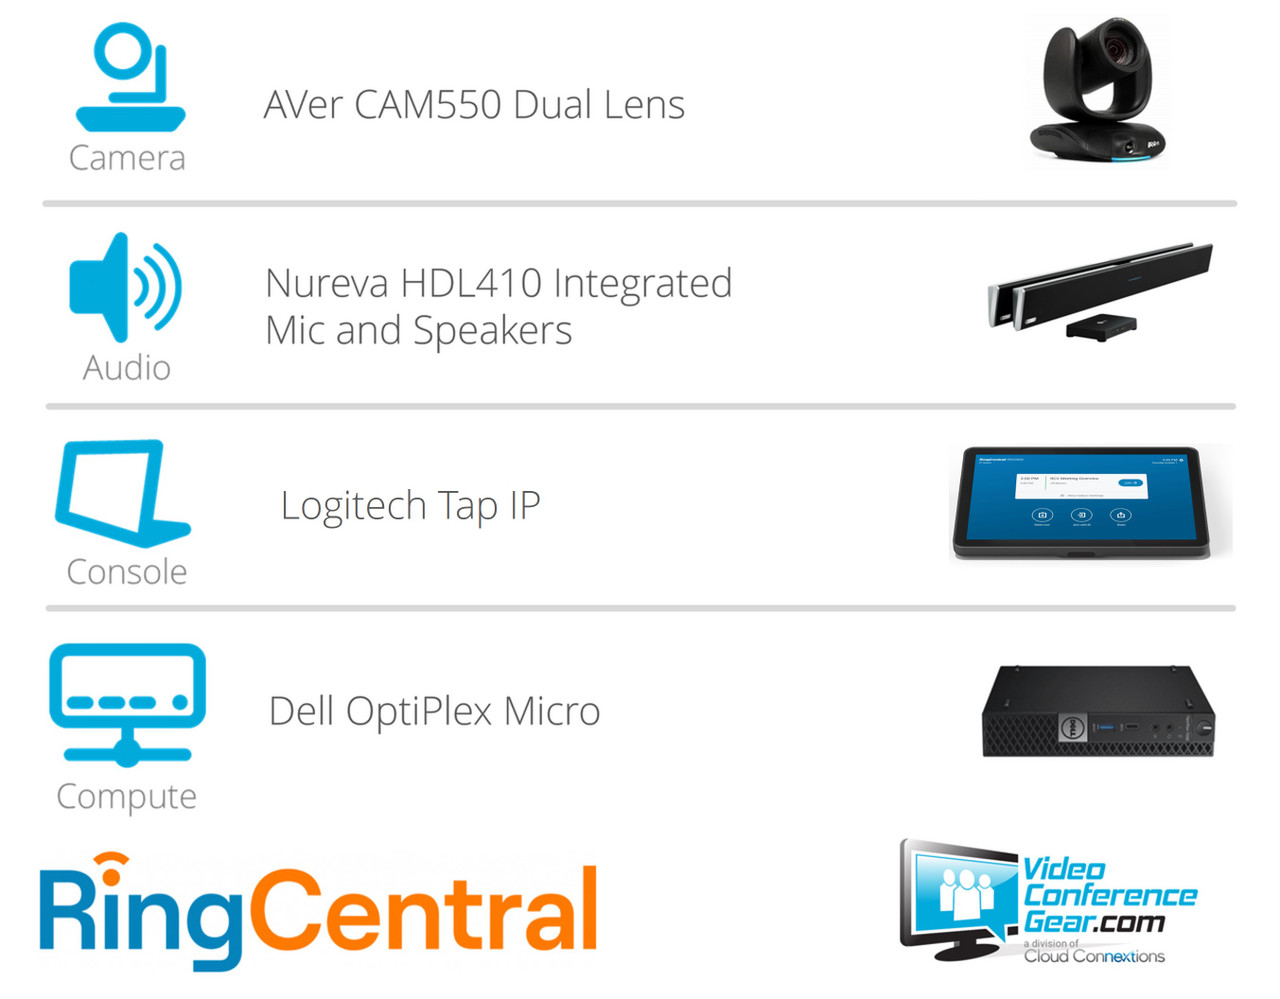 RingCentral Rooms Solution with AVer CAM550 and Nureva HDL410 - Large Room